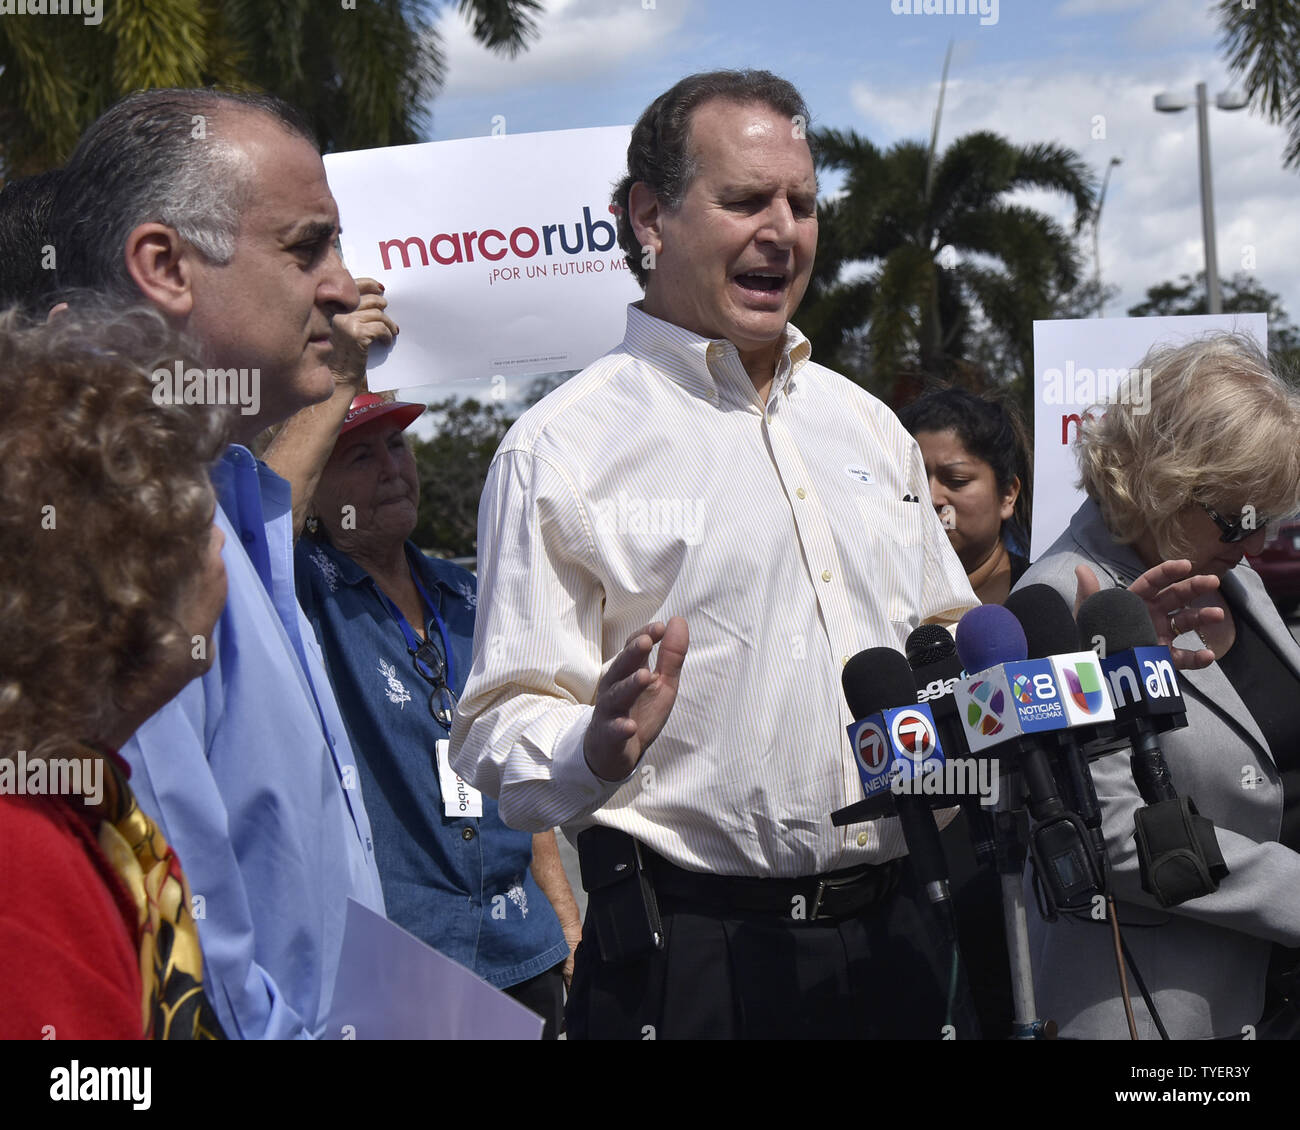 Early voting in the Republican presidential primary began in Miami-Dade County, Florida, February 29, 2016, At the John F. Kennedy Library, Hialeah, Florida., (L-R) Council President Luis Gonzalez, Miami-Dade County Commissioner,Esteban Bovo, Former Congressman, Lincoln Diaz-Balart, and  Hialeah City Councilman.Lourdes Lozano, talk to the media urging South Floridians to vote for Marco  Rubio and reject the extremist and divisive campaign of demagogue Donald Trump. Photo by Gary I Rothstein/UPI Stock Photo